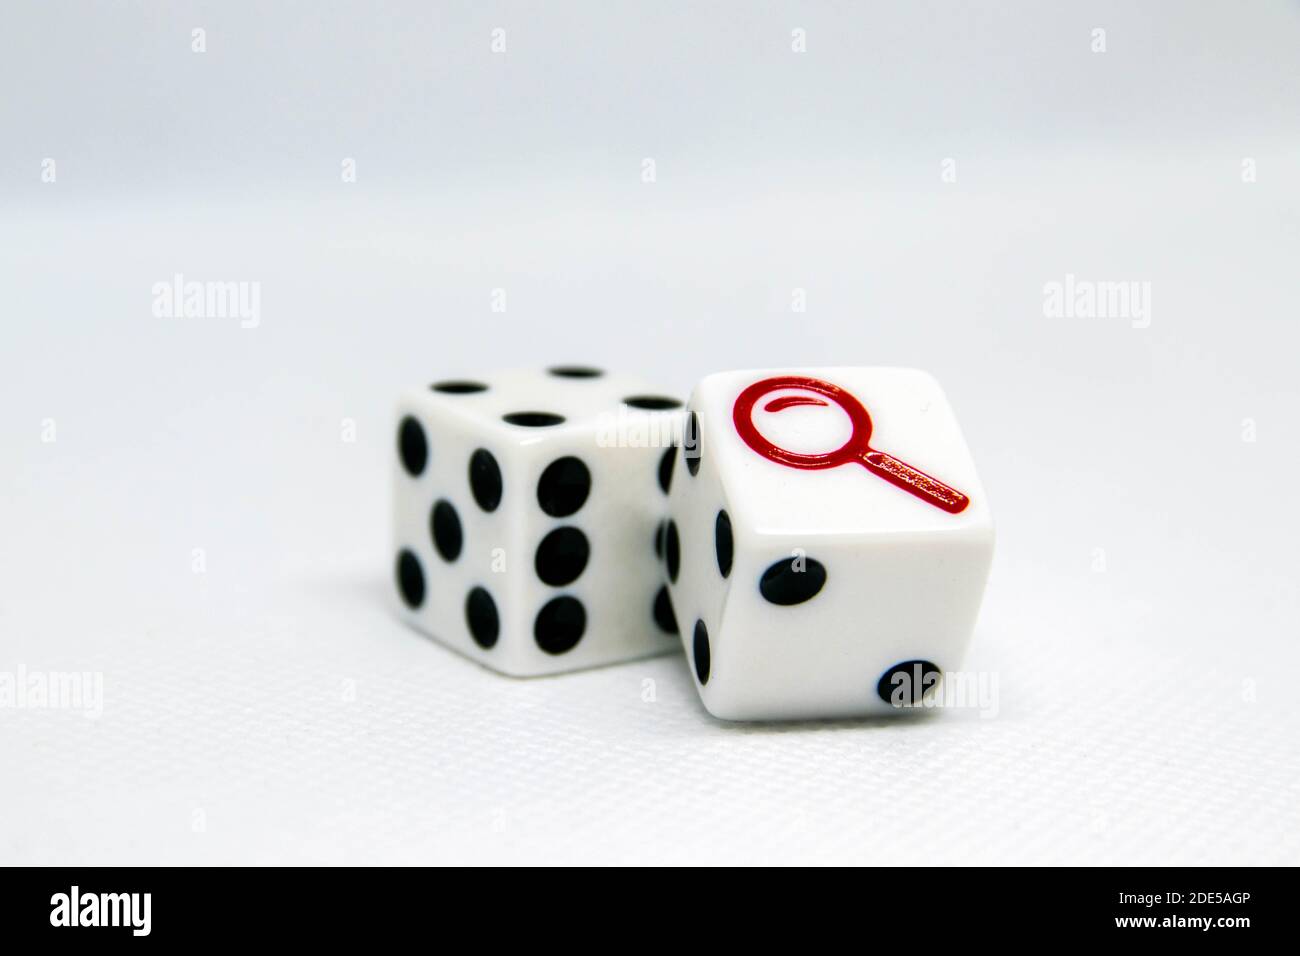 Pair of die with one showing black dots and one showing a red detectives magnifying looking glass. Isolated. Concept for mystery, strategy, luck, Stock Photo